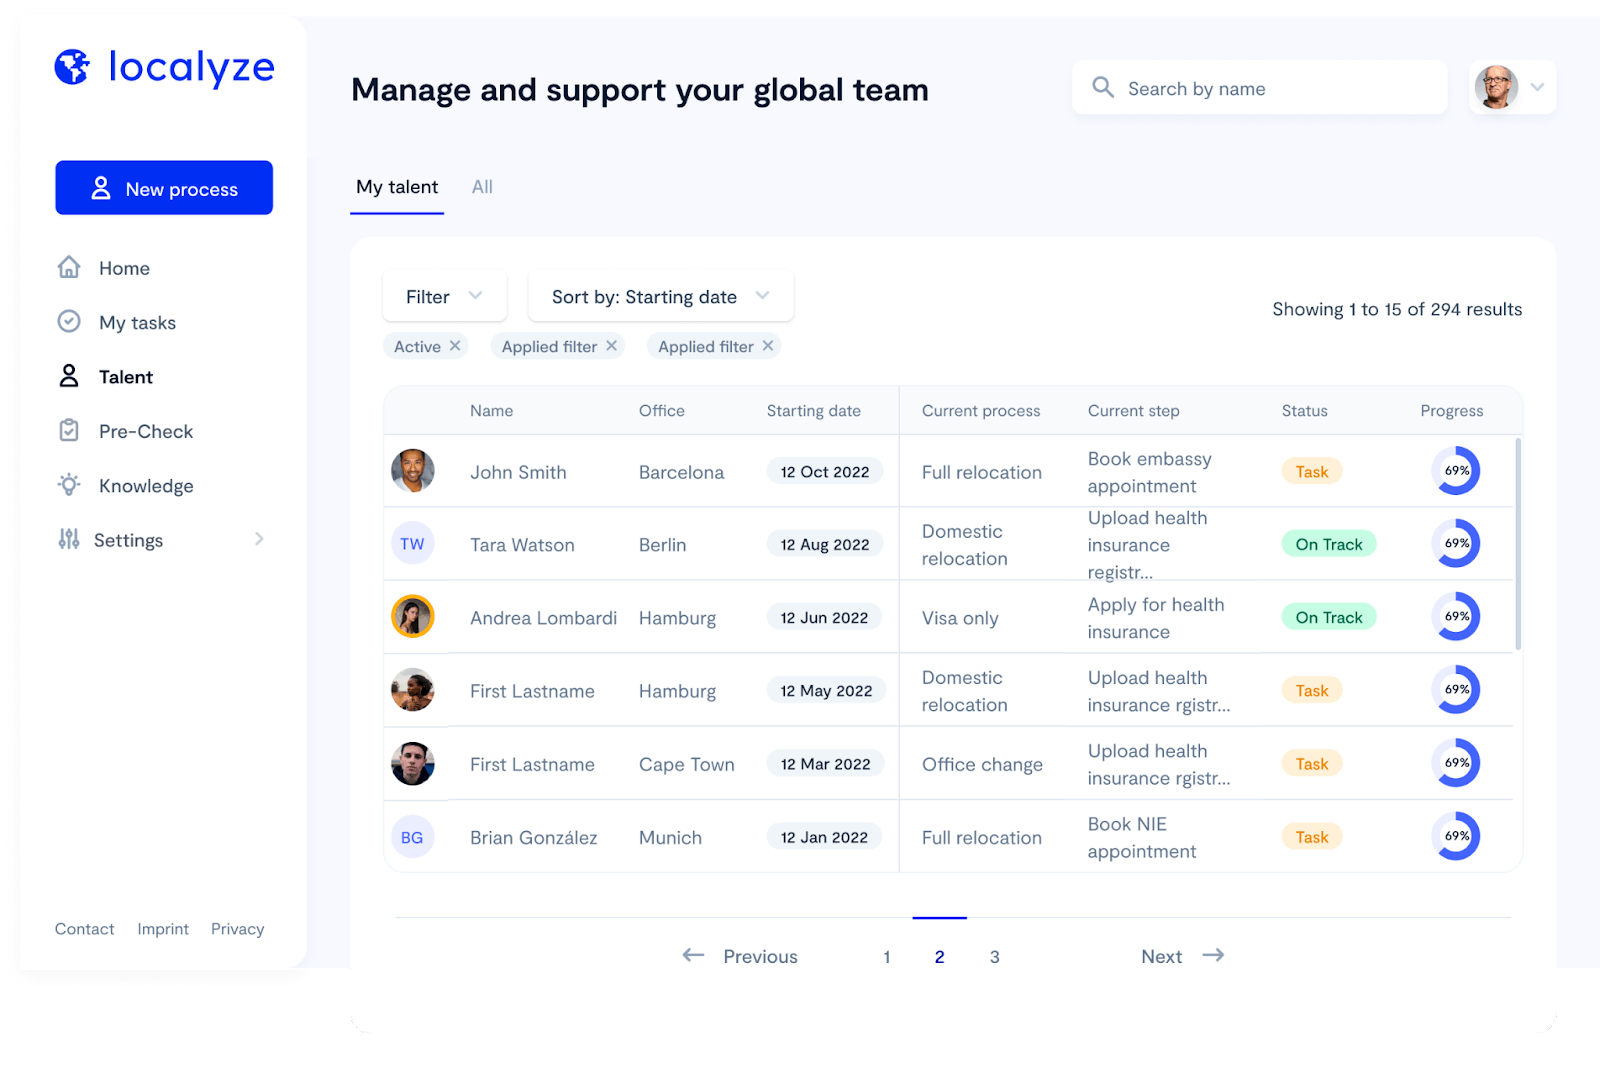 manage and support your global team with Localyze - showing progress on various global mobility cases